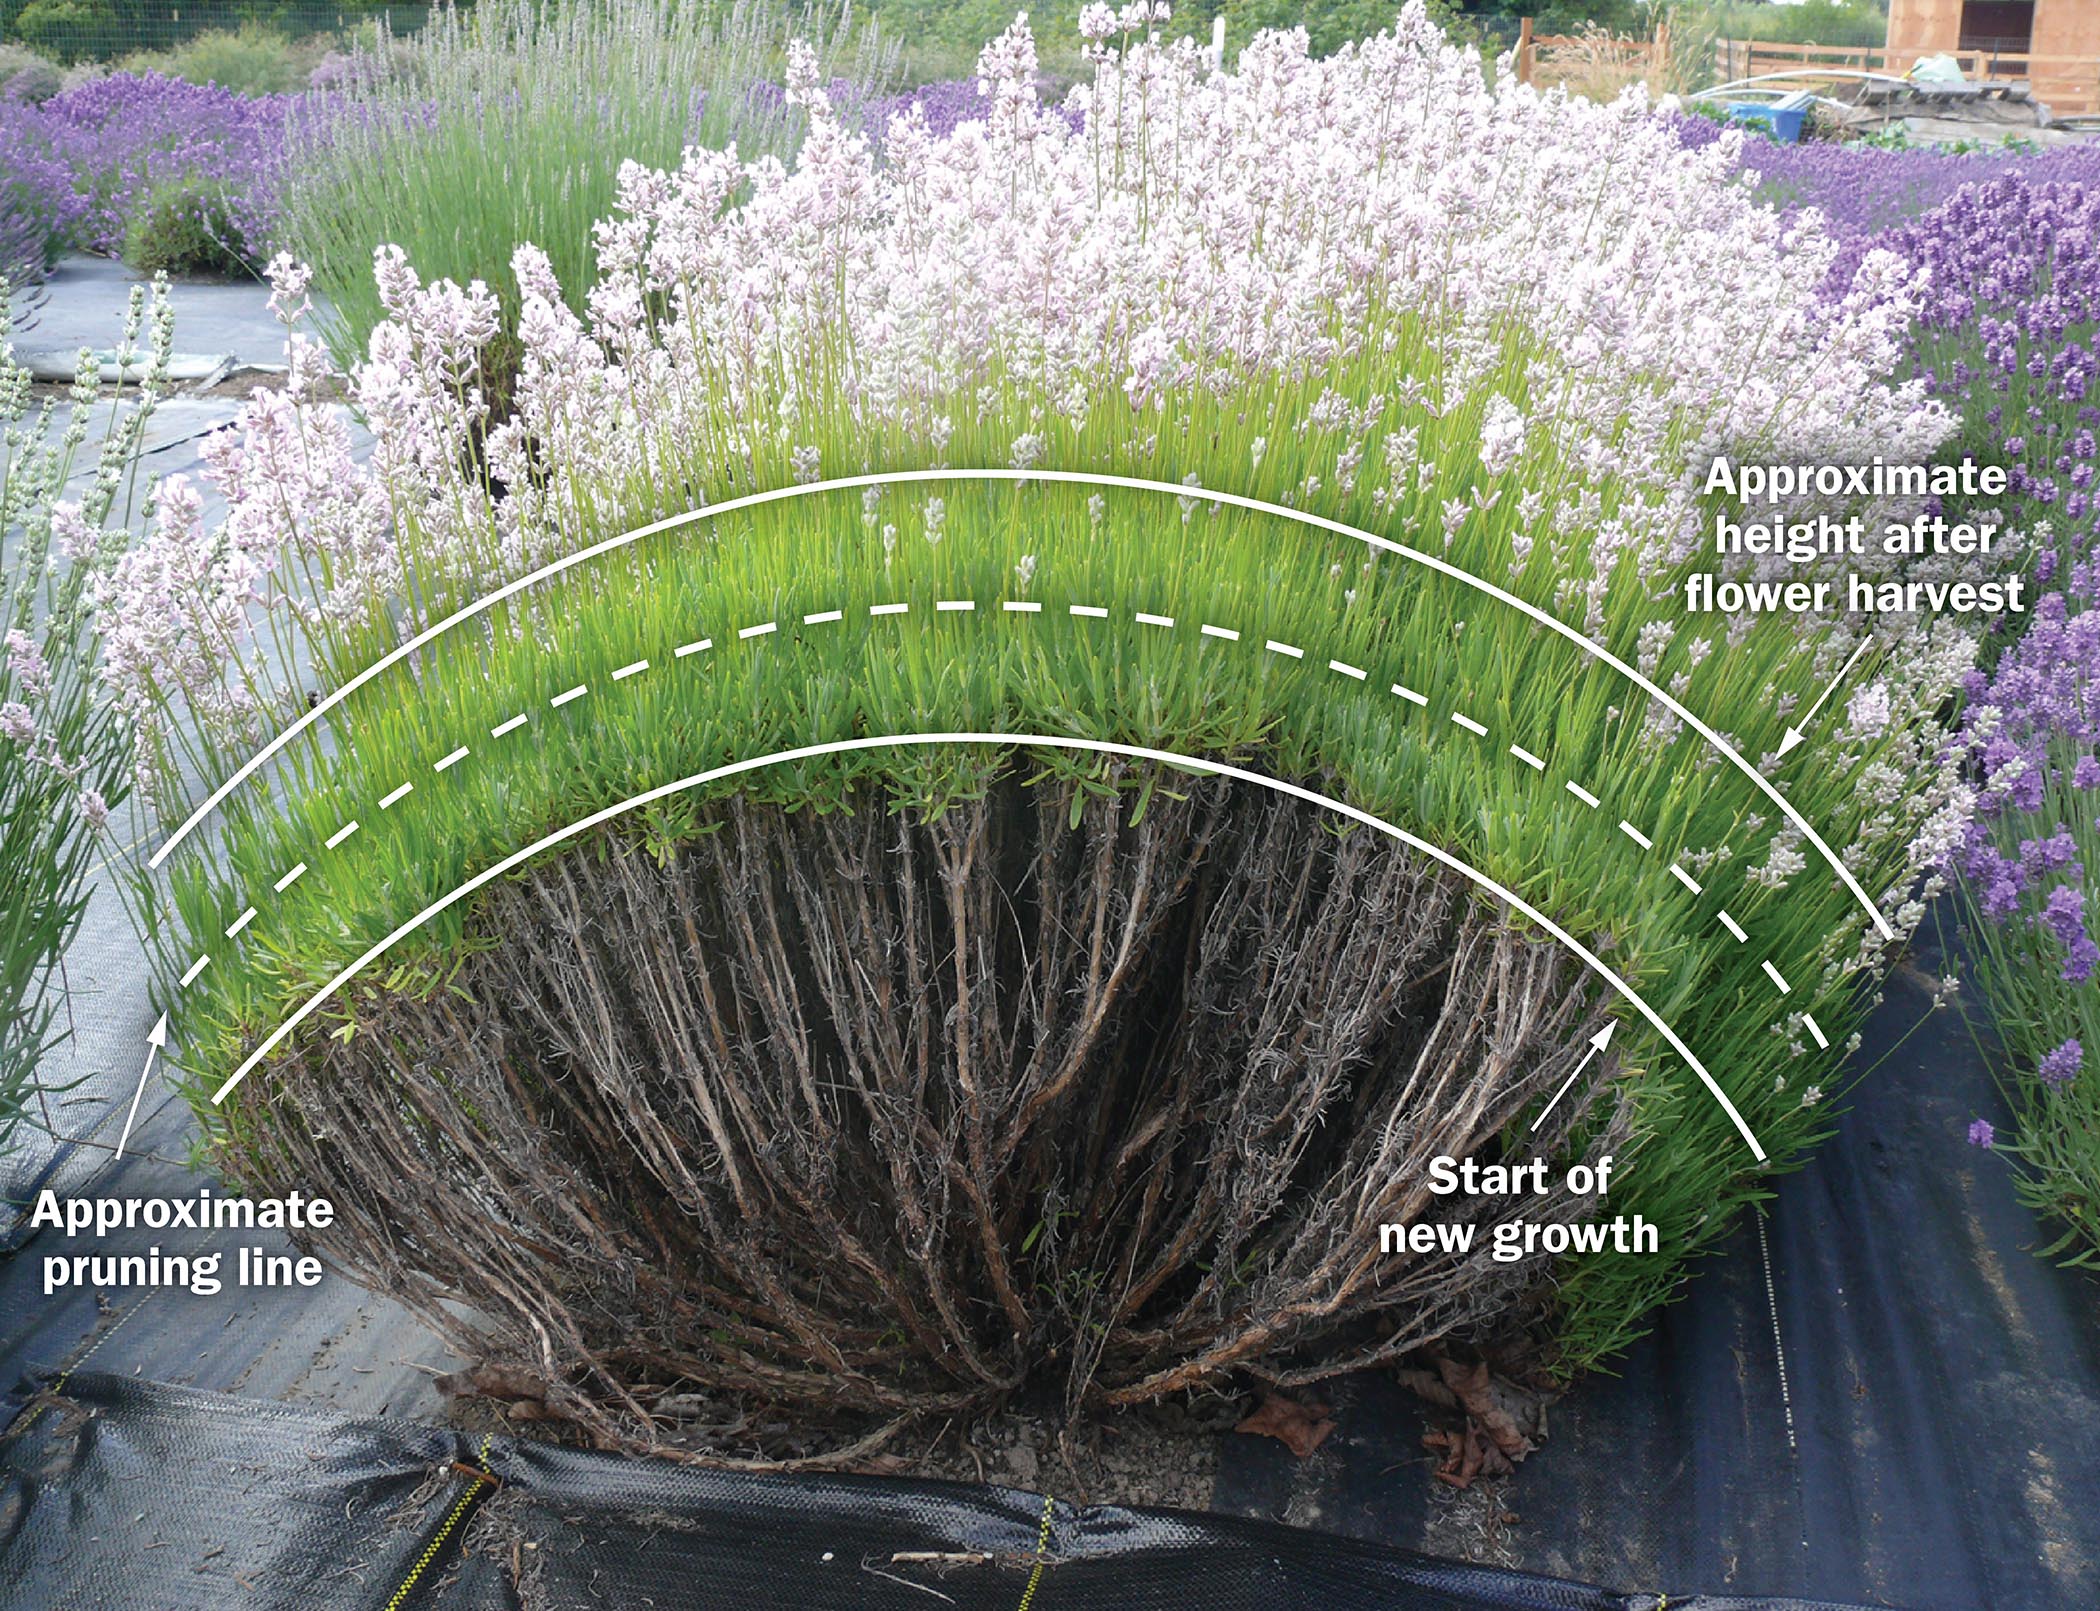 An illustration of a lavender plant with lines showing how it should be pruned.